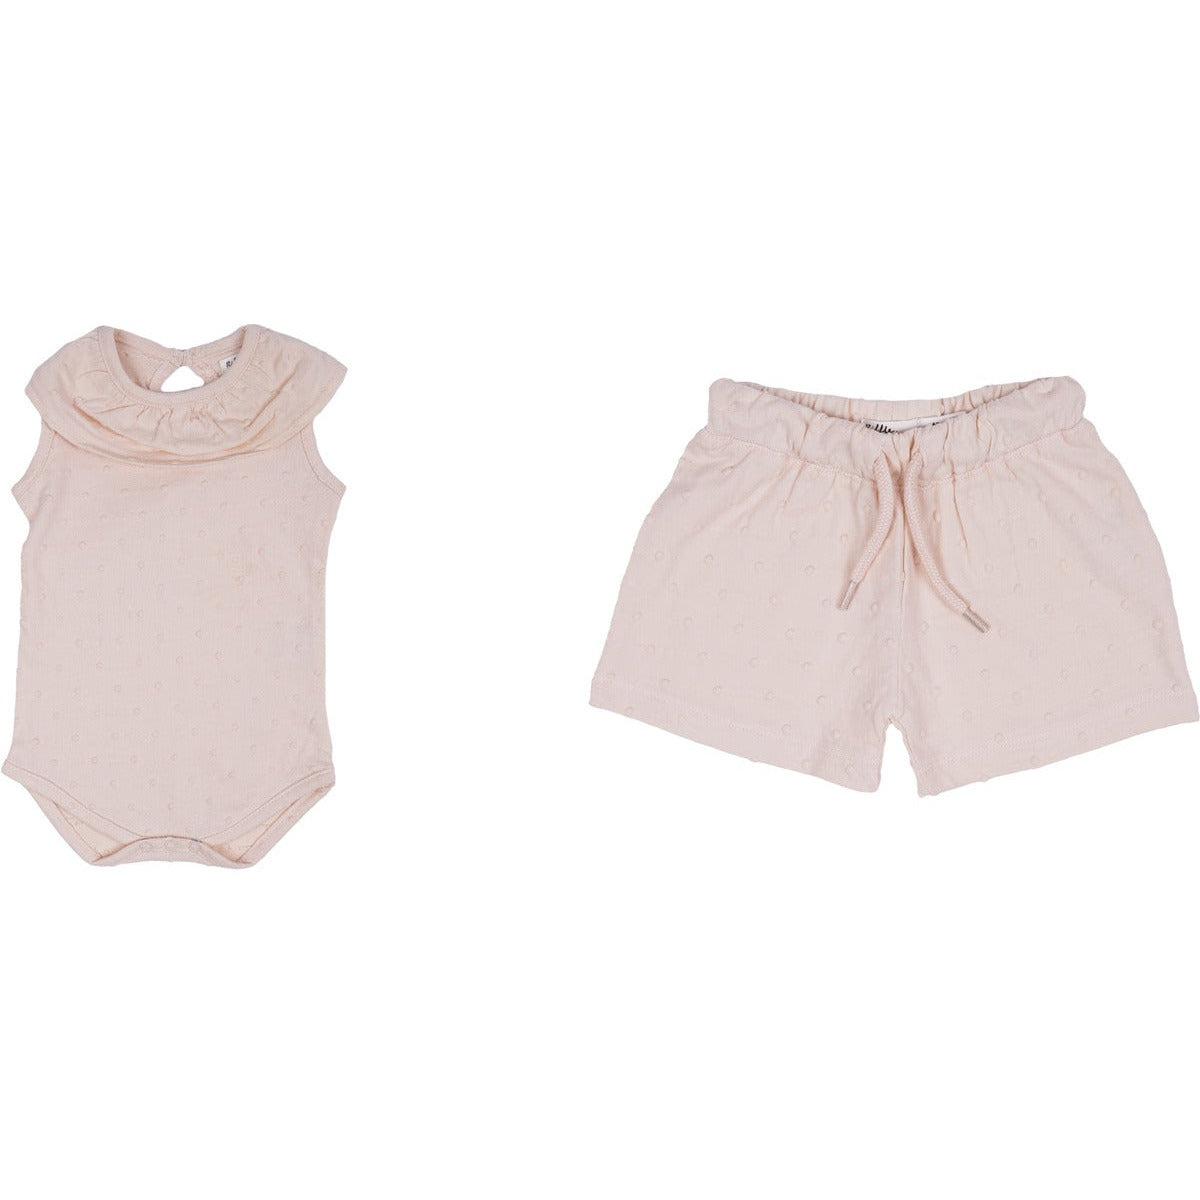 Uni Dot Pale Pink Onesie and Short